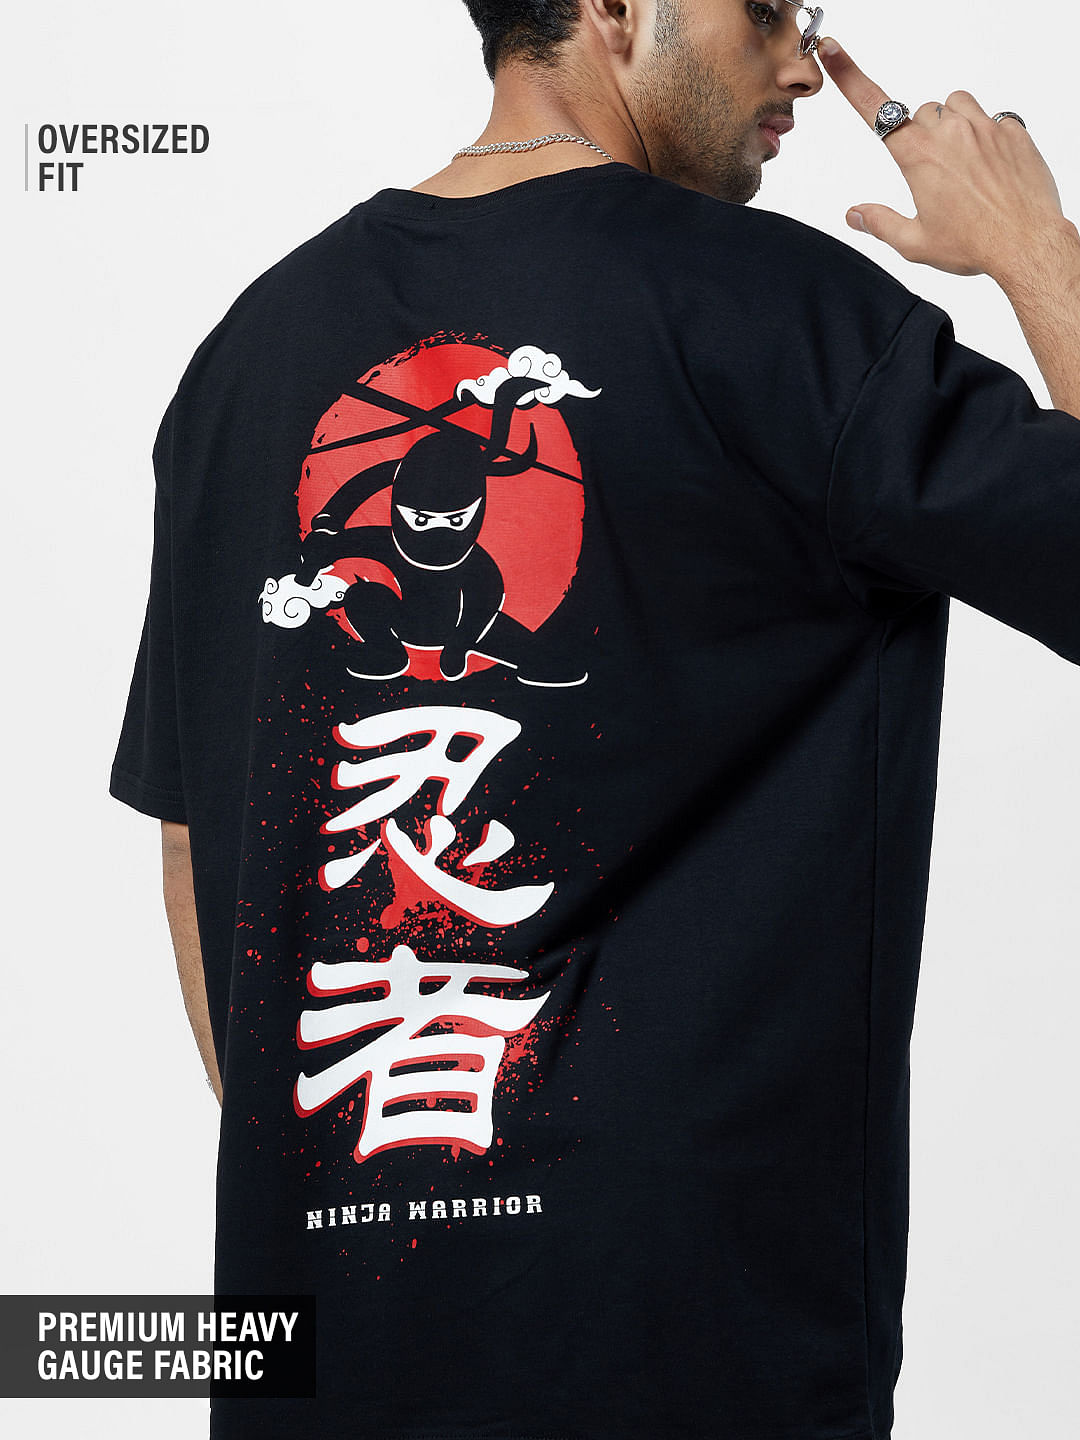 Ninja Warrior Oversized T-Shirts By The Souled Store